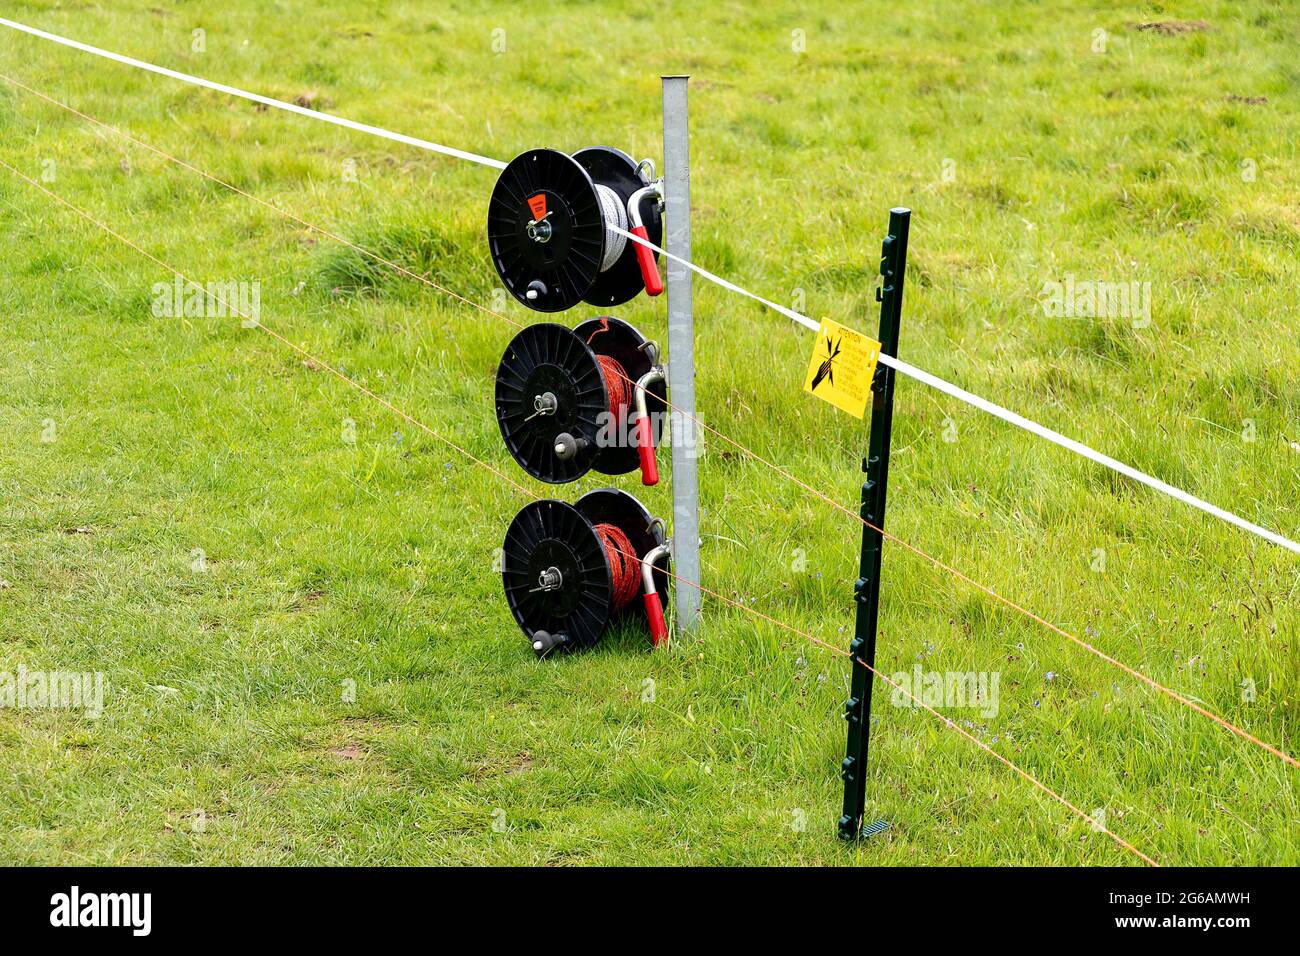 https://c8.alamy.com/comp/2G6AMWH/electric-fence-wire-on-storage-cog-wheels-to-make-up-an-electric-fence-2G6AMWH.jpg